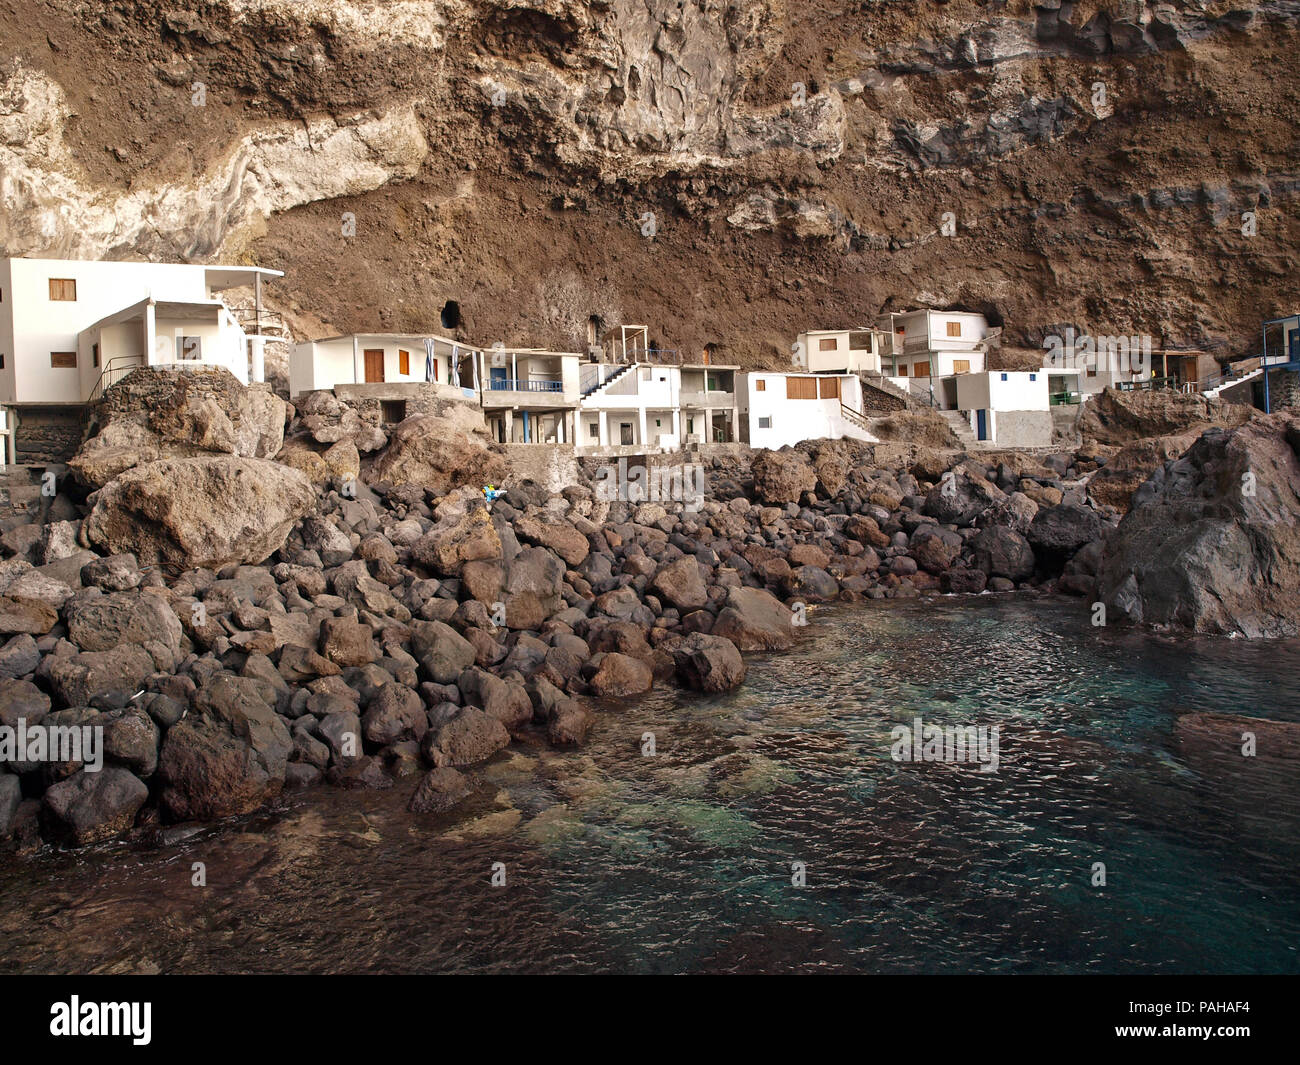 Prois de Candelaria , a collection of houses built into the base of overhanging cliffs on the Spanish Canary Island of La Palma Stock Photo